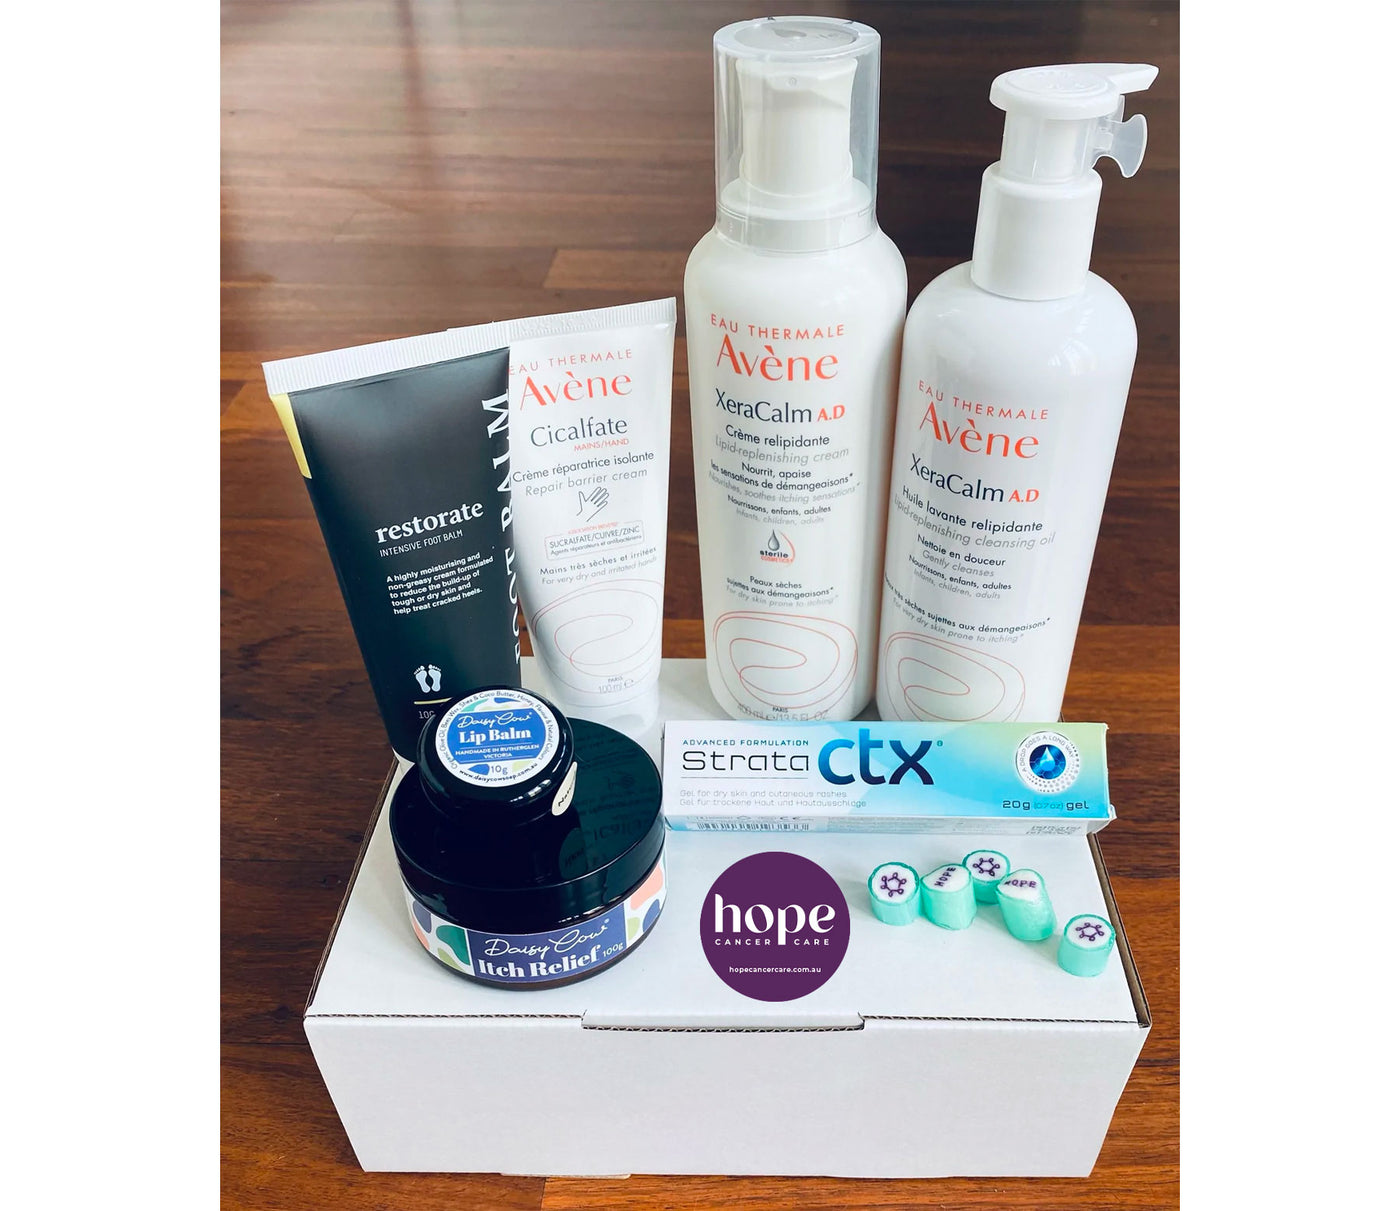 The HOPE Intense Skin Care Pack